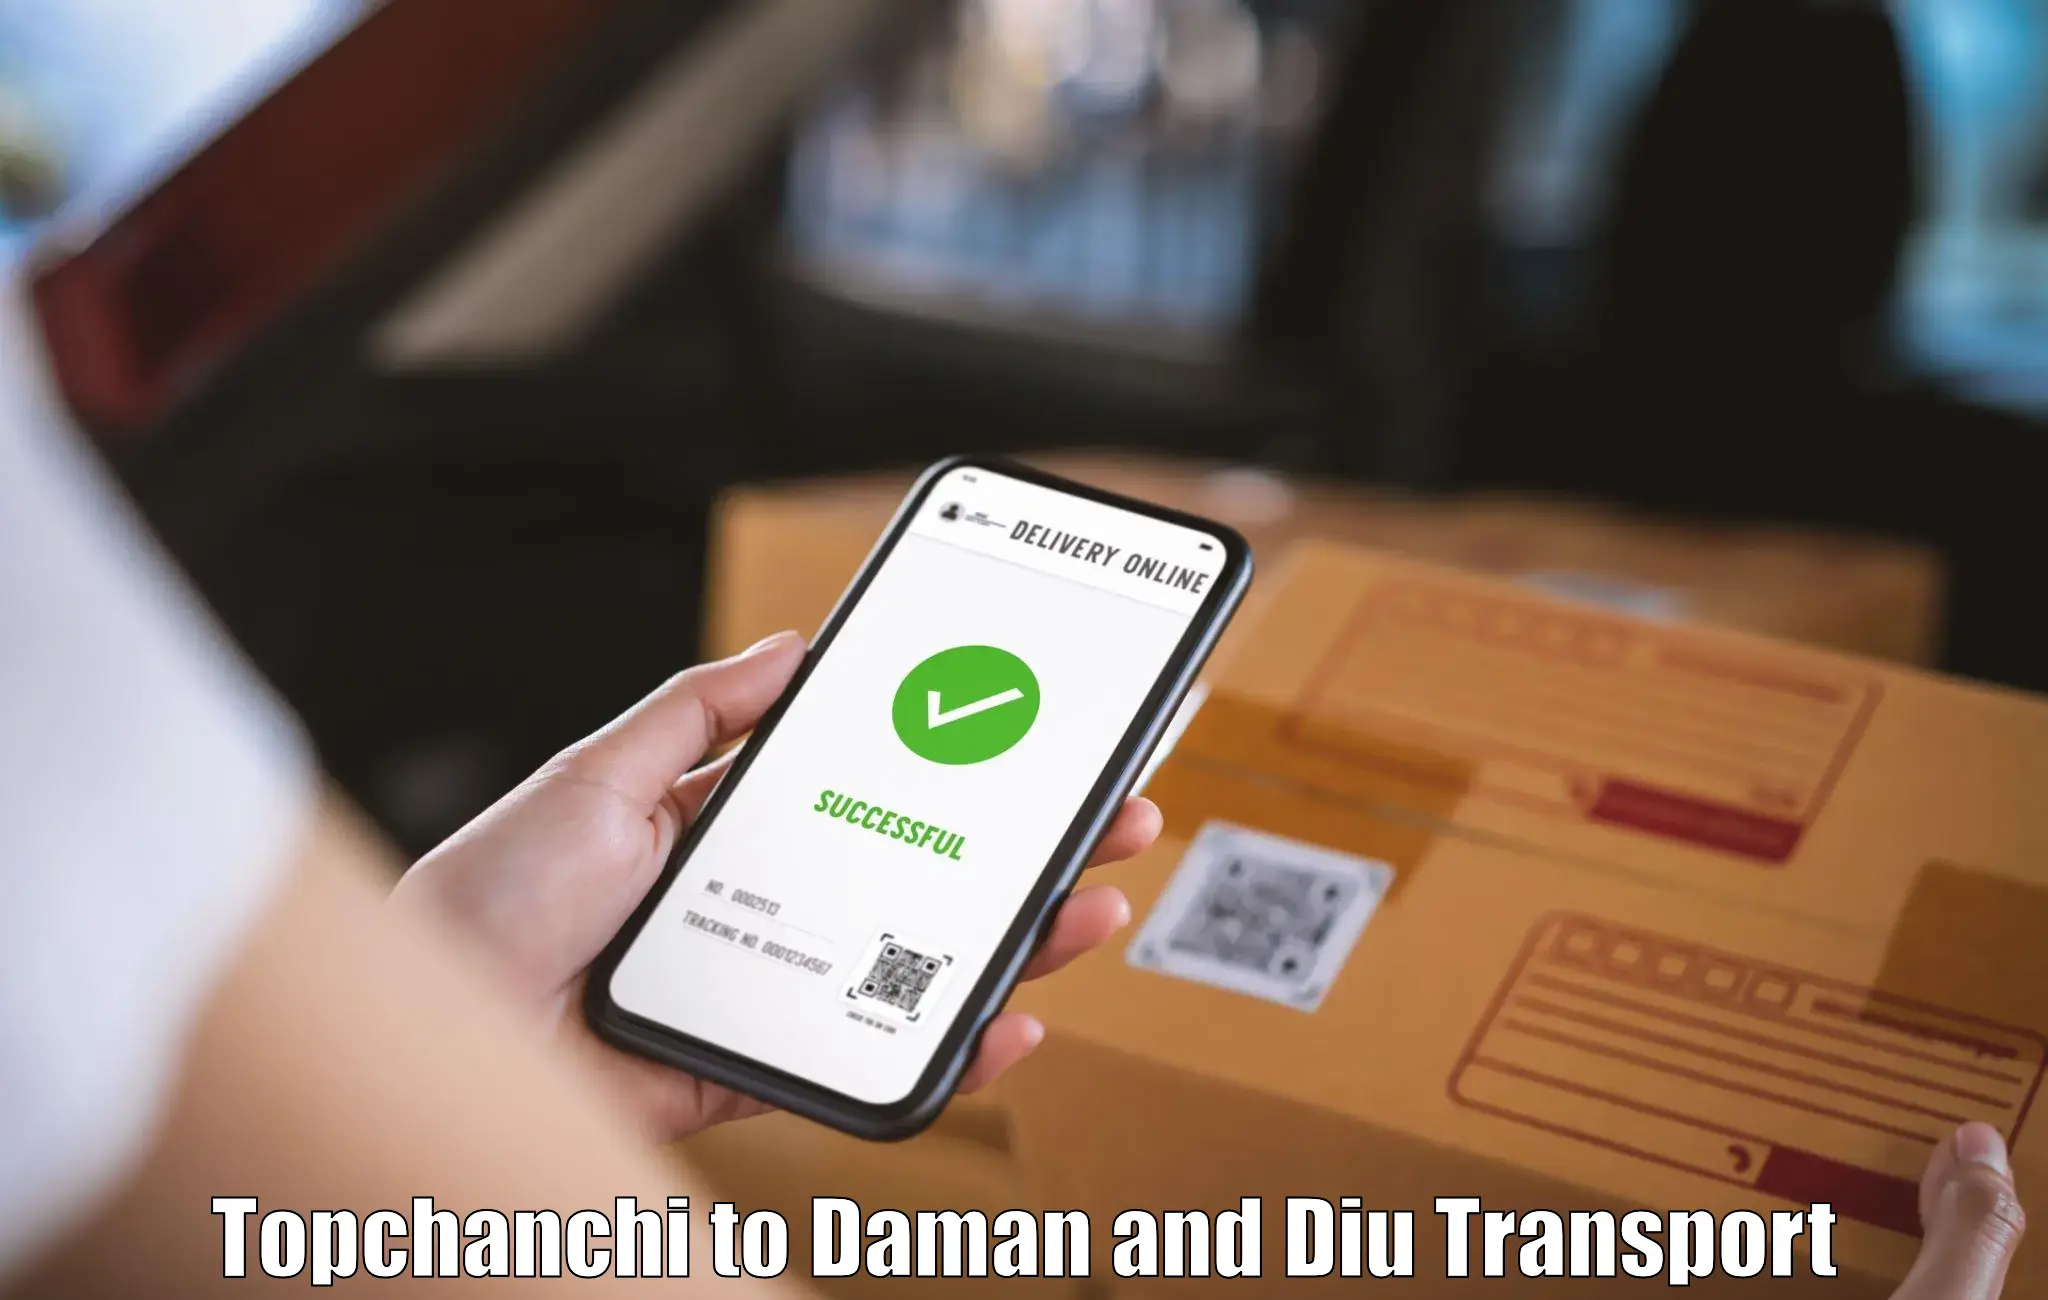 Road transport services Topchanchi to Daman